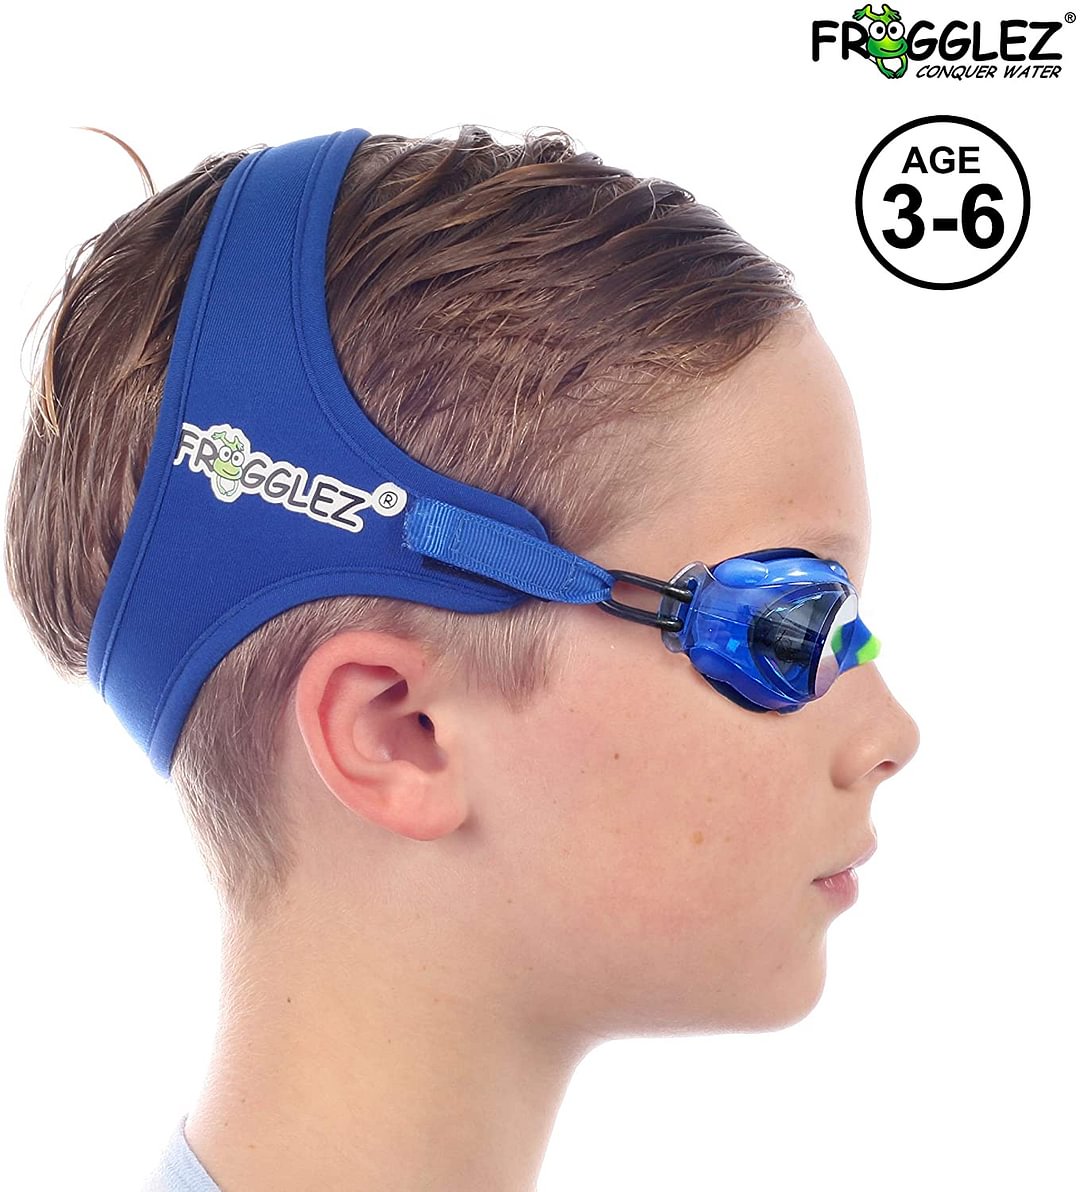 Kids Swim Goggles with Pain-Free Strap | Ideal for Ages 3 – 6 in Swimming Lessons | Leakproof, No Hair Pulling